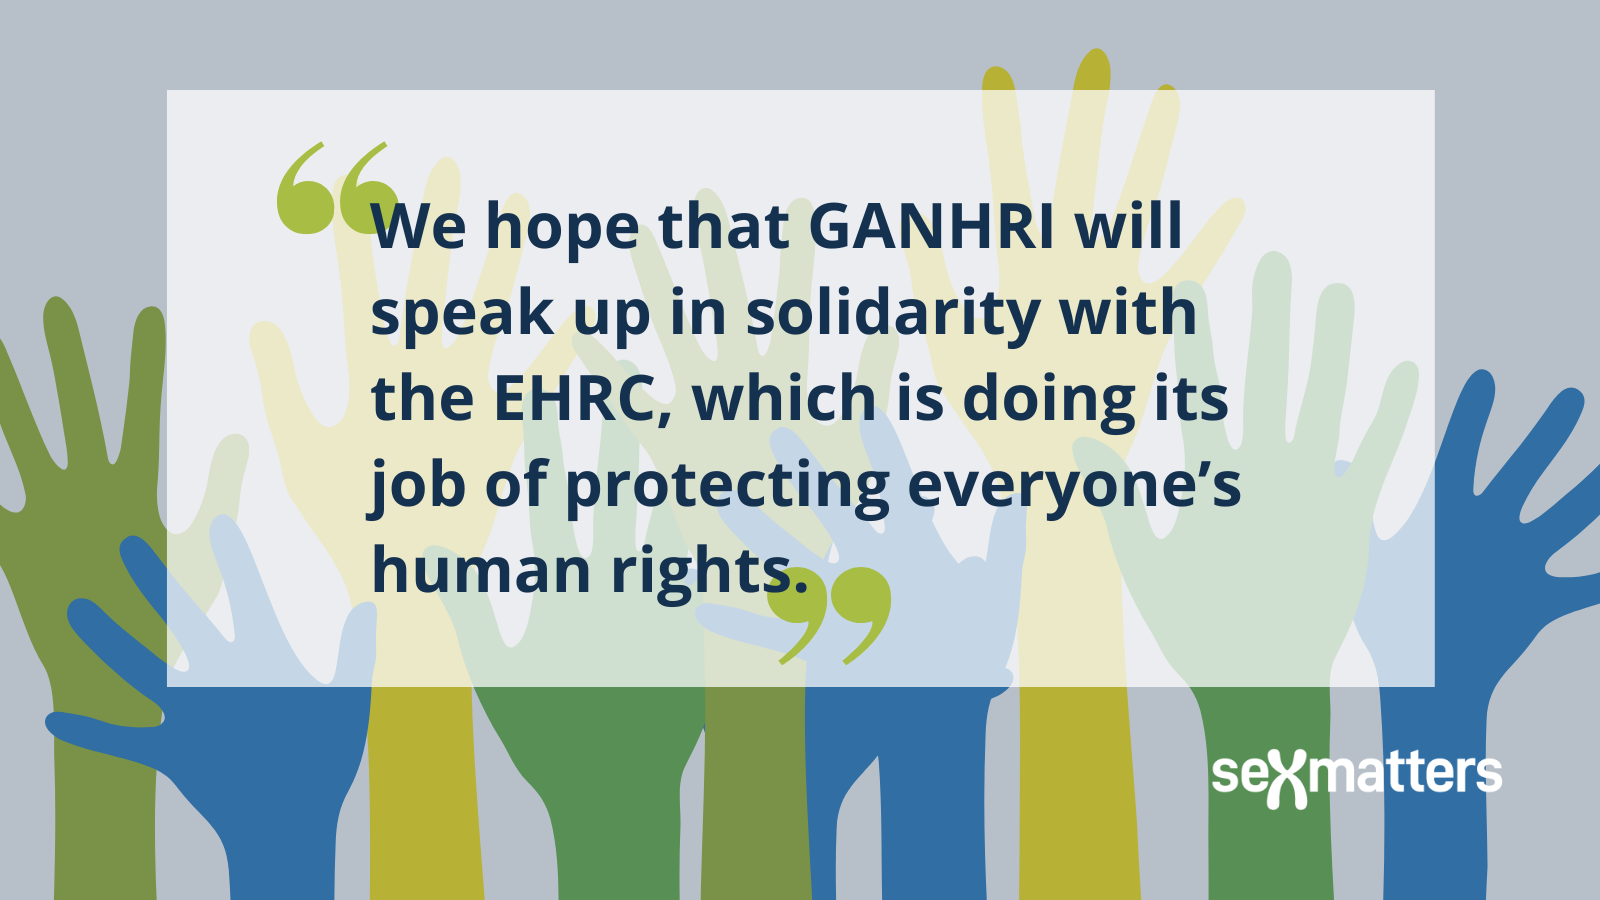 We hope that GANHRI will speak up in solidarity with the EHRC, which is doing its job of protecting everyone’s human rights.